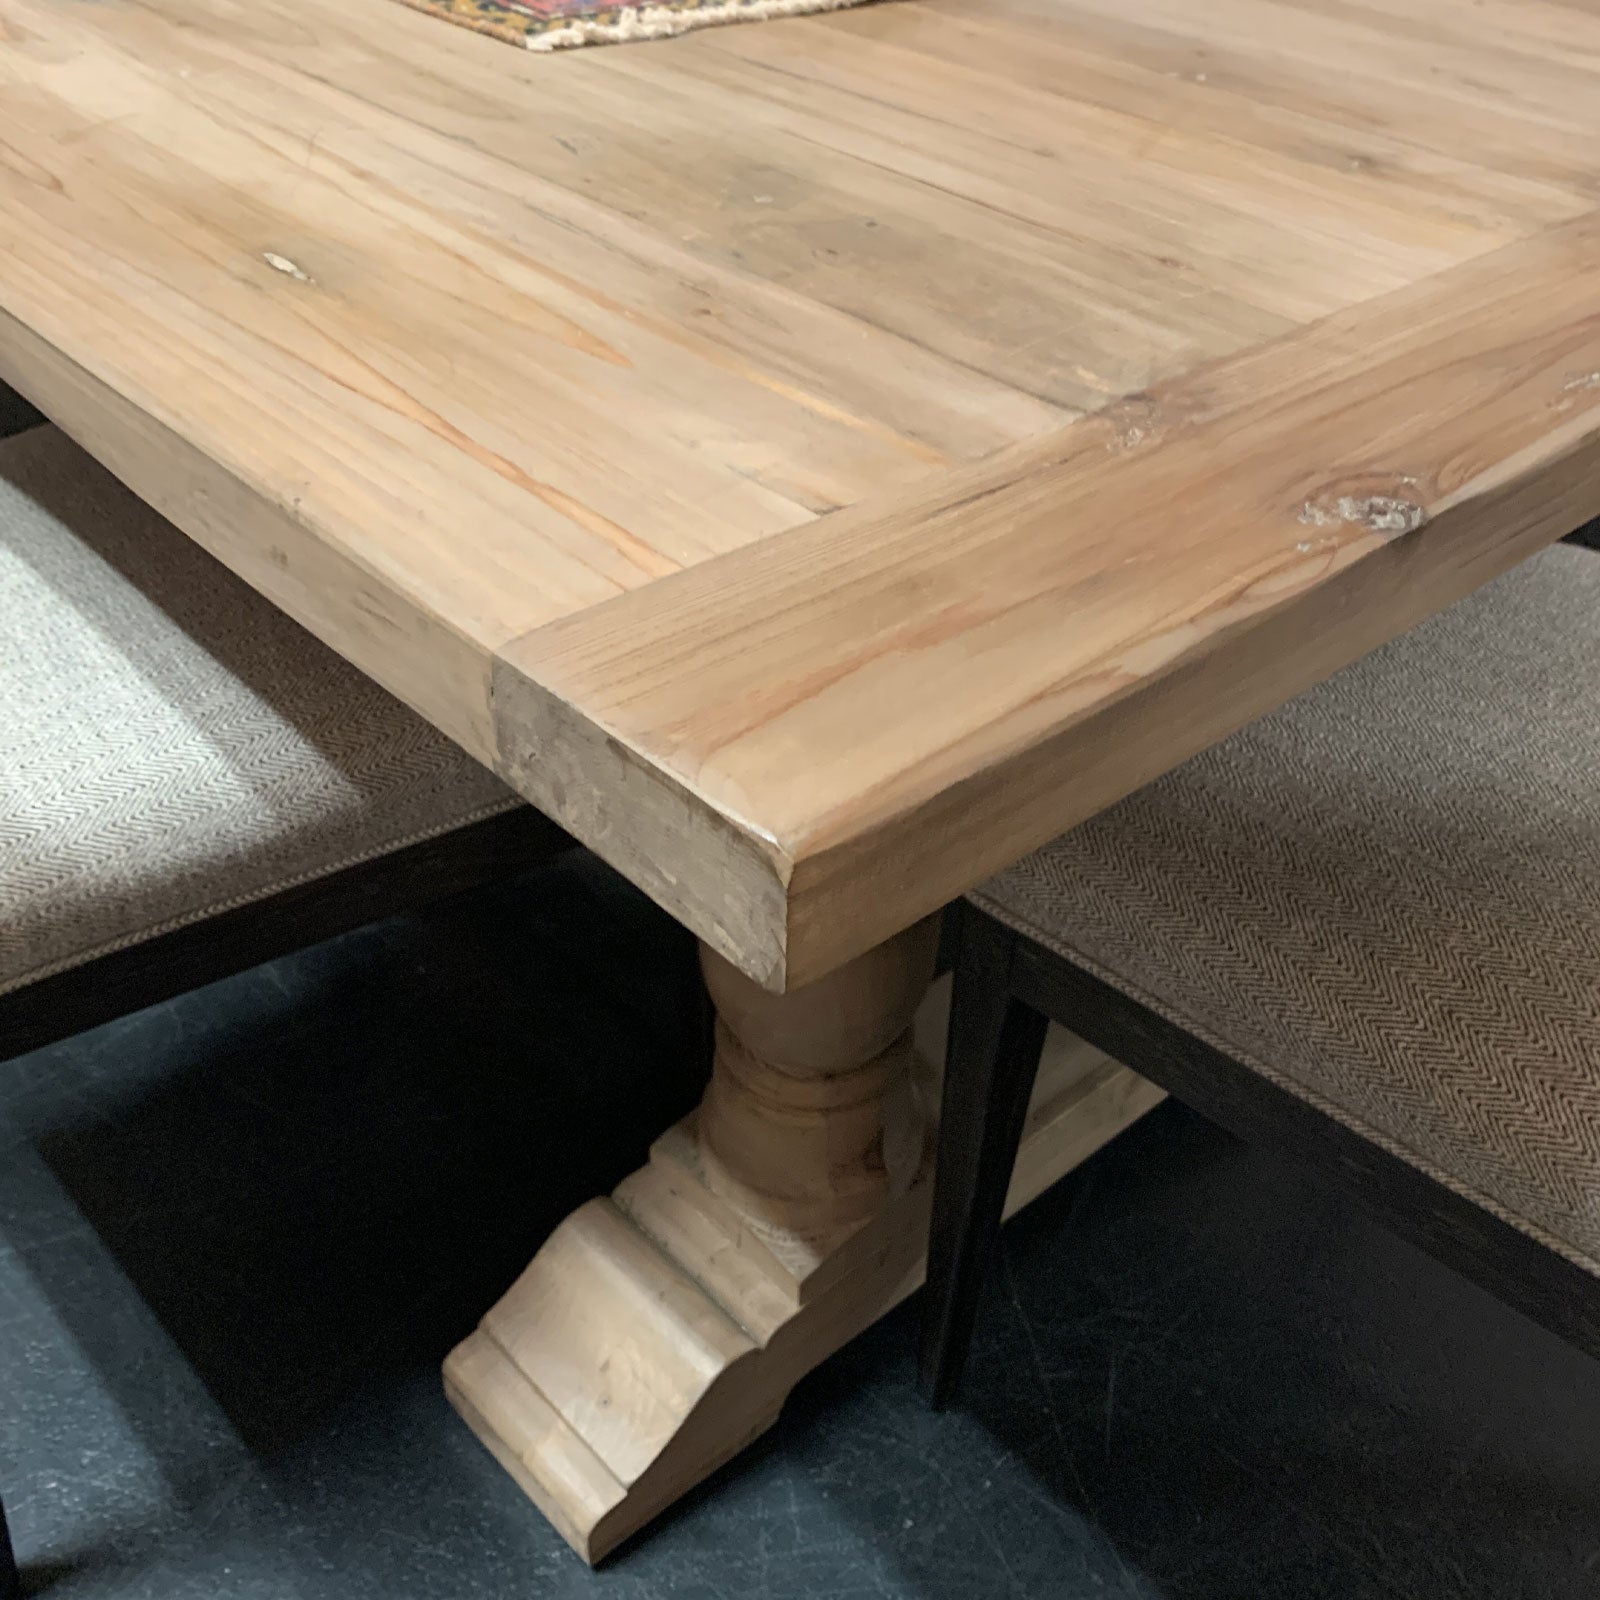 Stefon 76" Dining Table